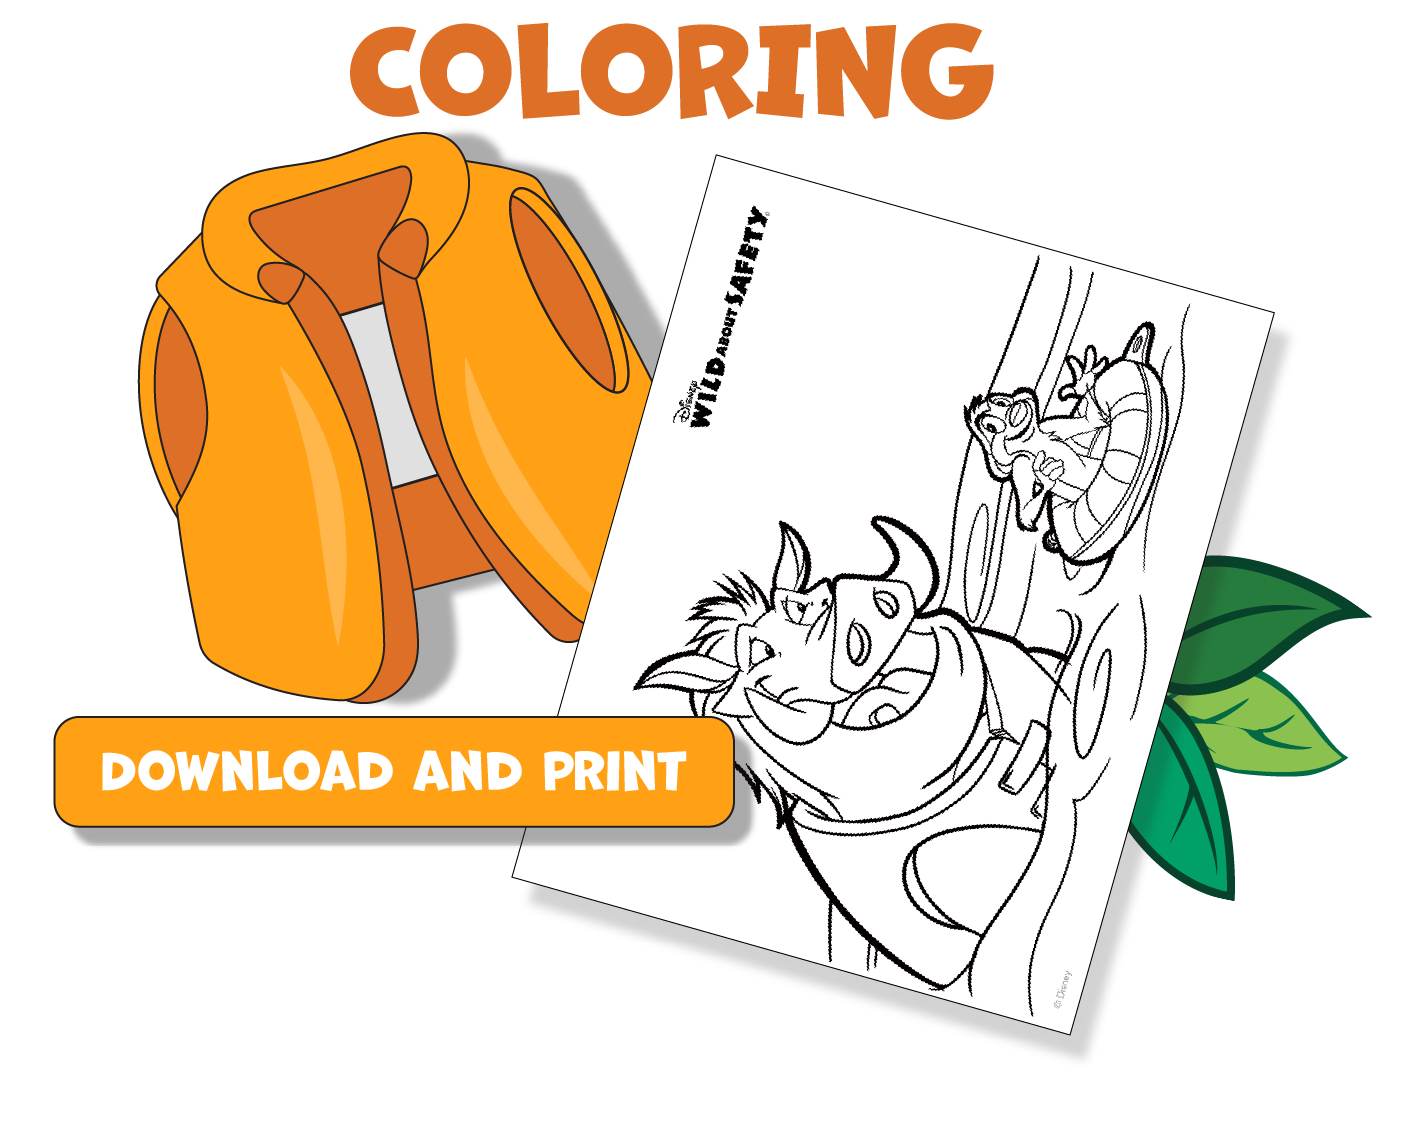 Download and print coloring page of Timon and Pumbaa in the water